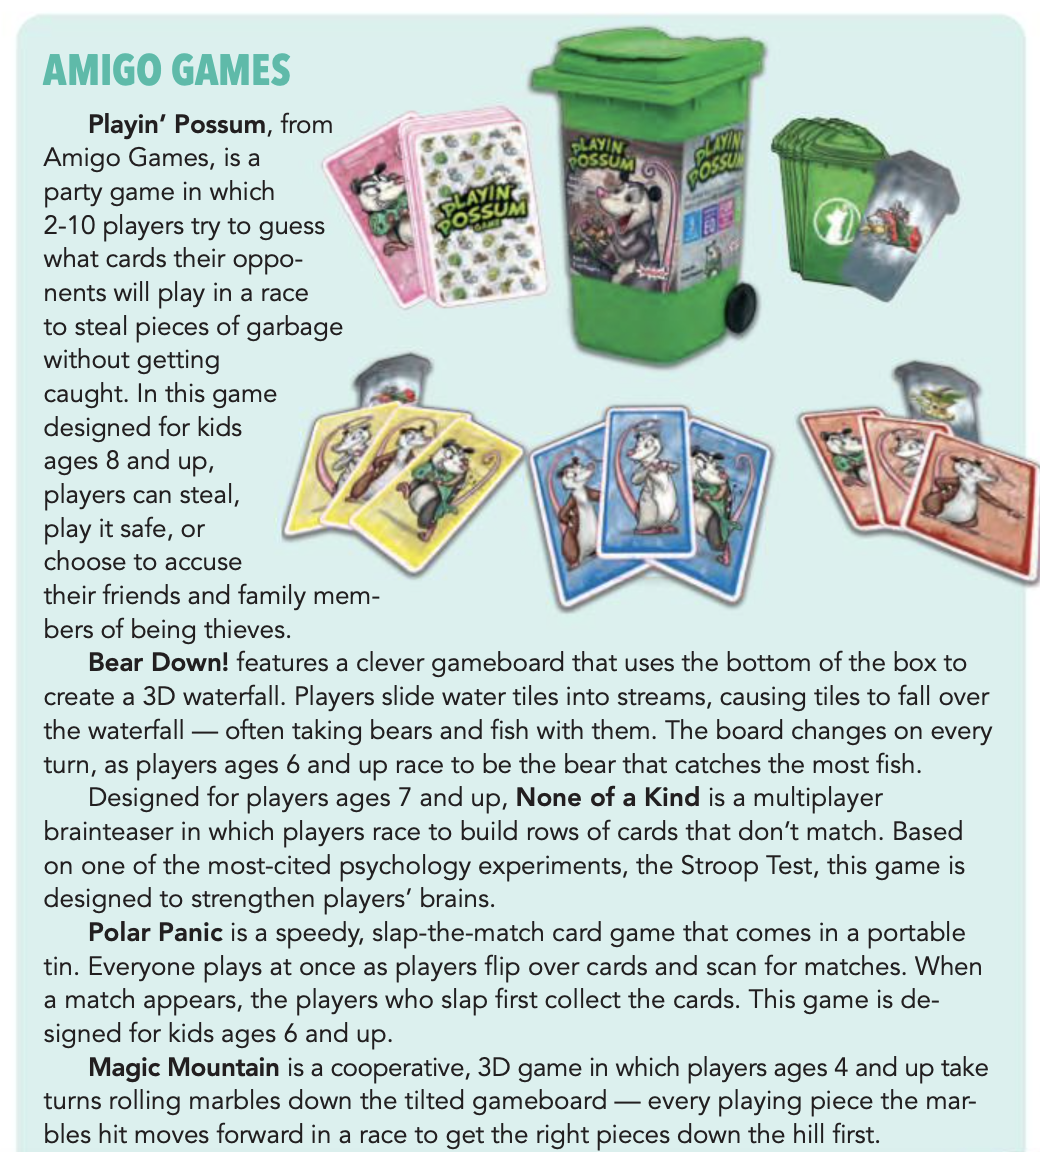  The Logo Game - The Game of Things You Know and Love! - Fun  Party Game - Ages 12+ - 2-6 Players : Everything Else